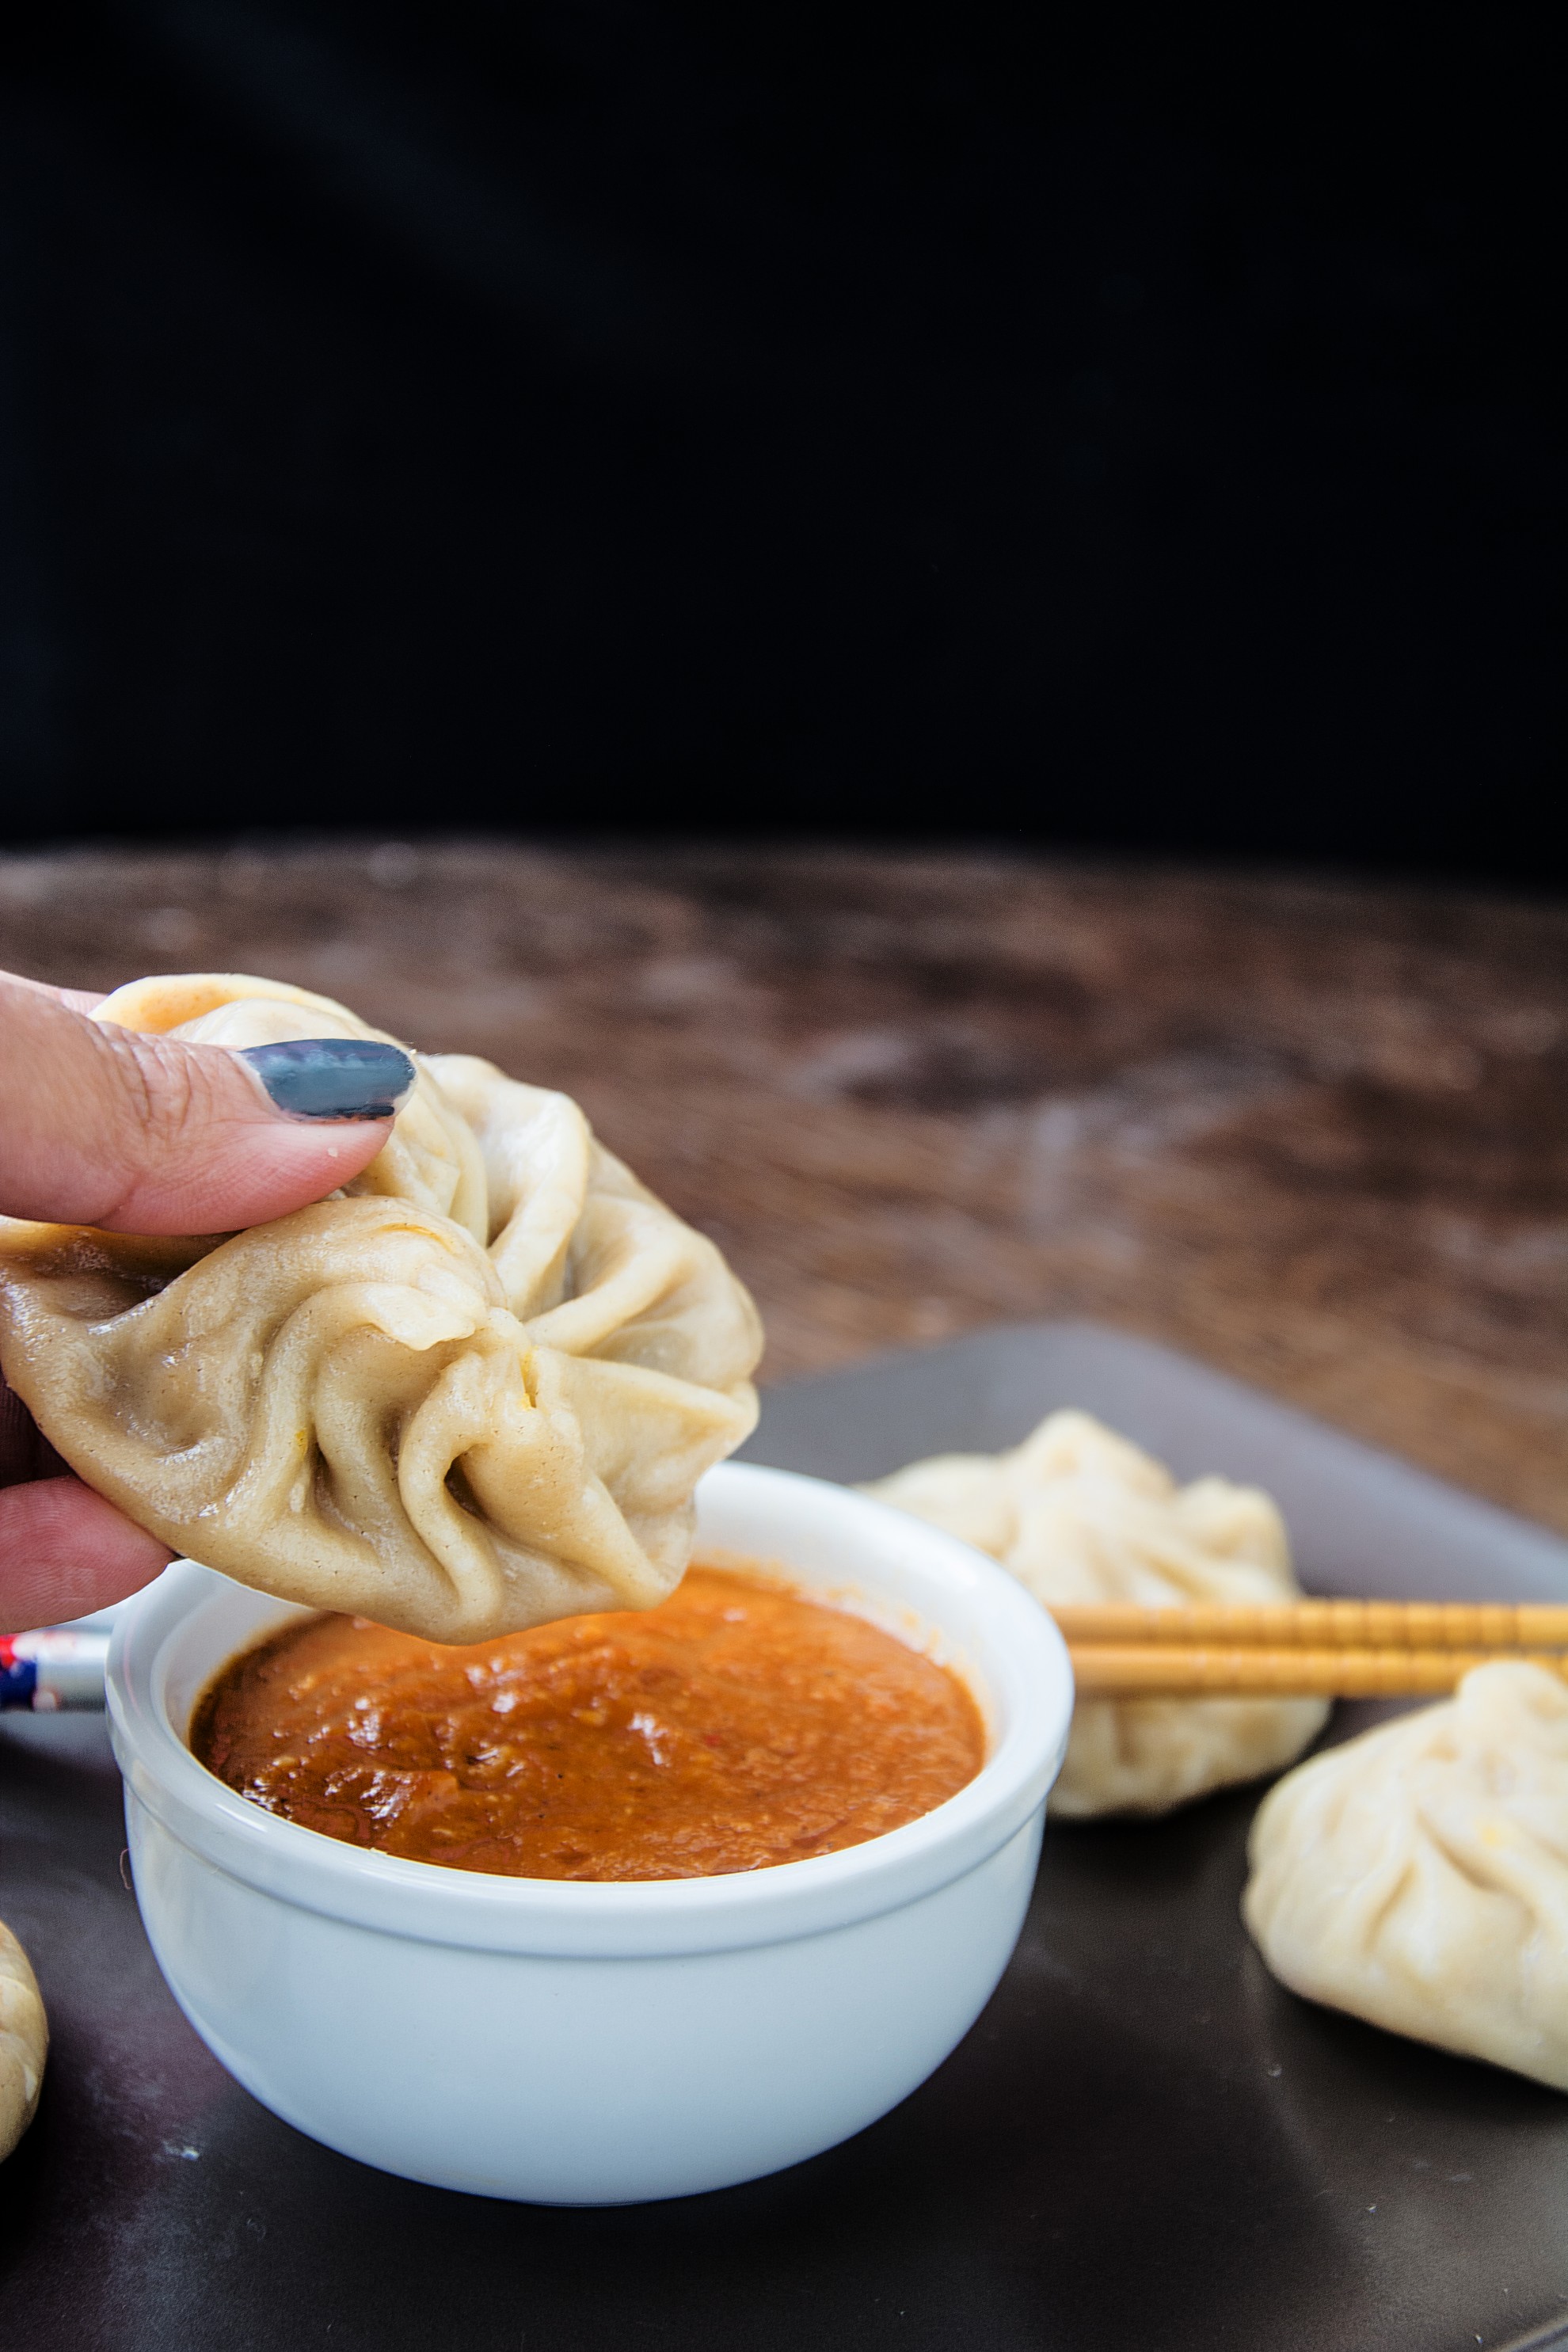 Steamed Veg Momos With Spicy Chili Chutney | Vegetable Dim Sum Recipe